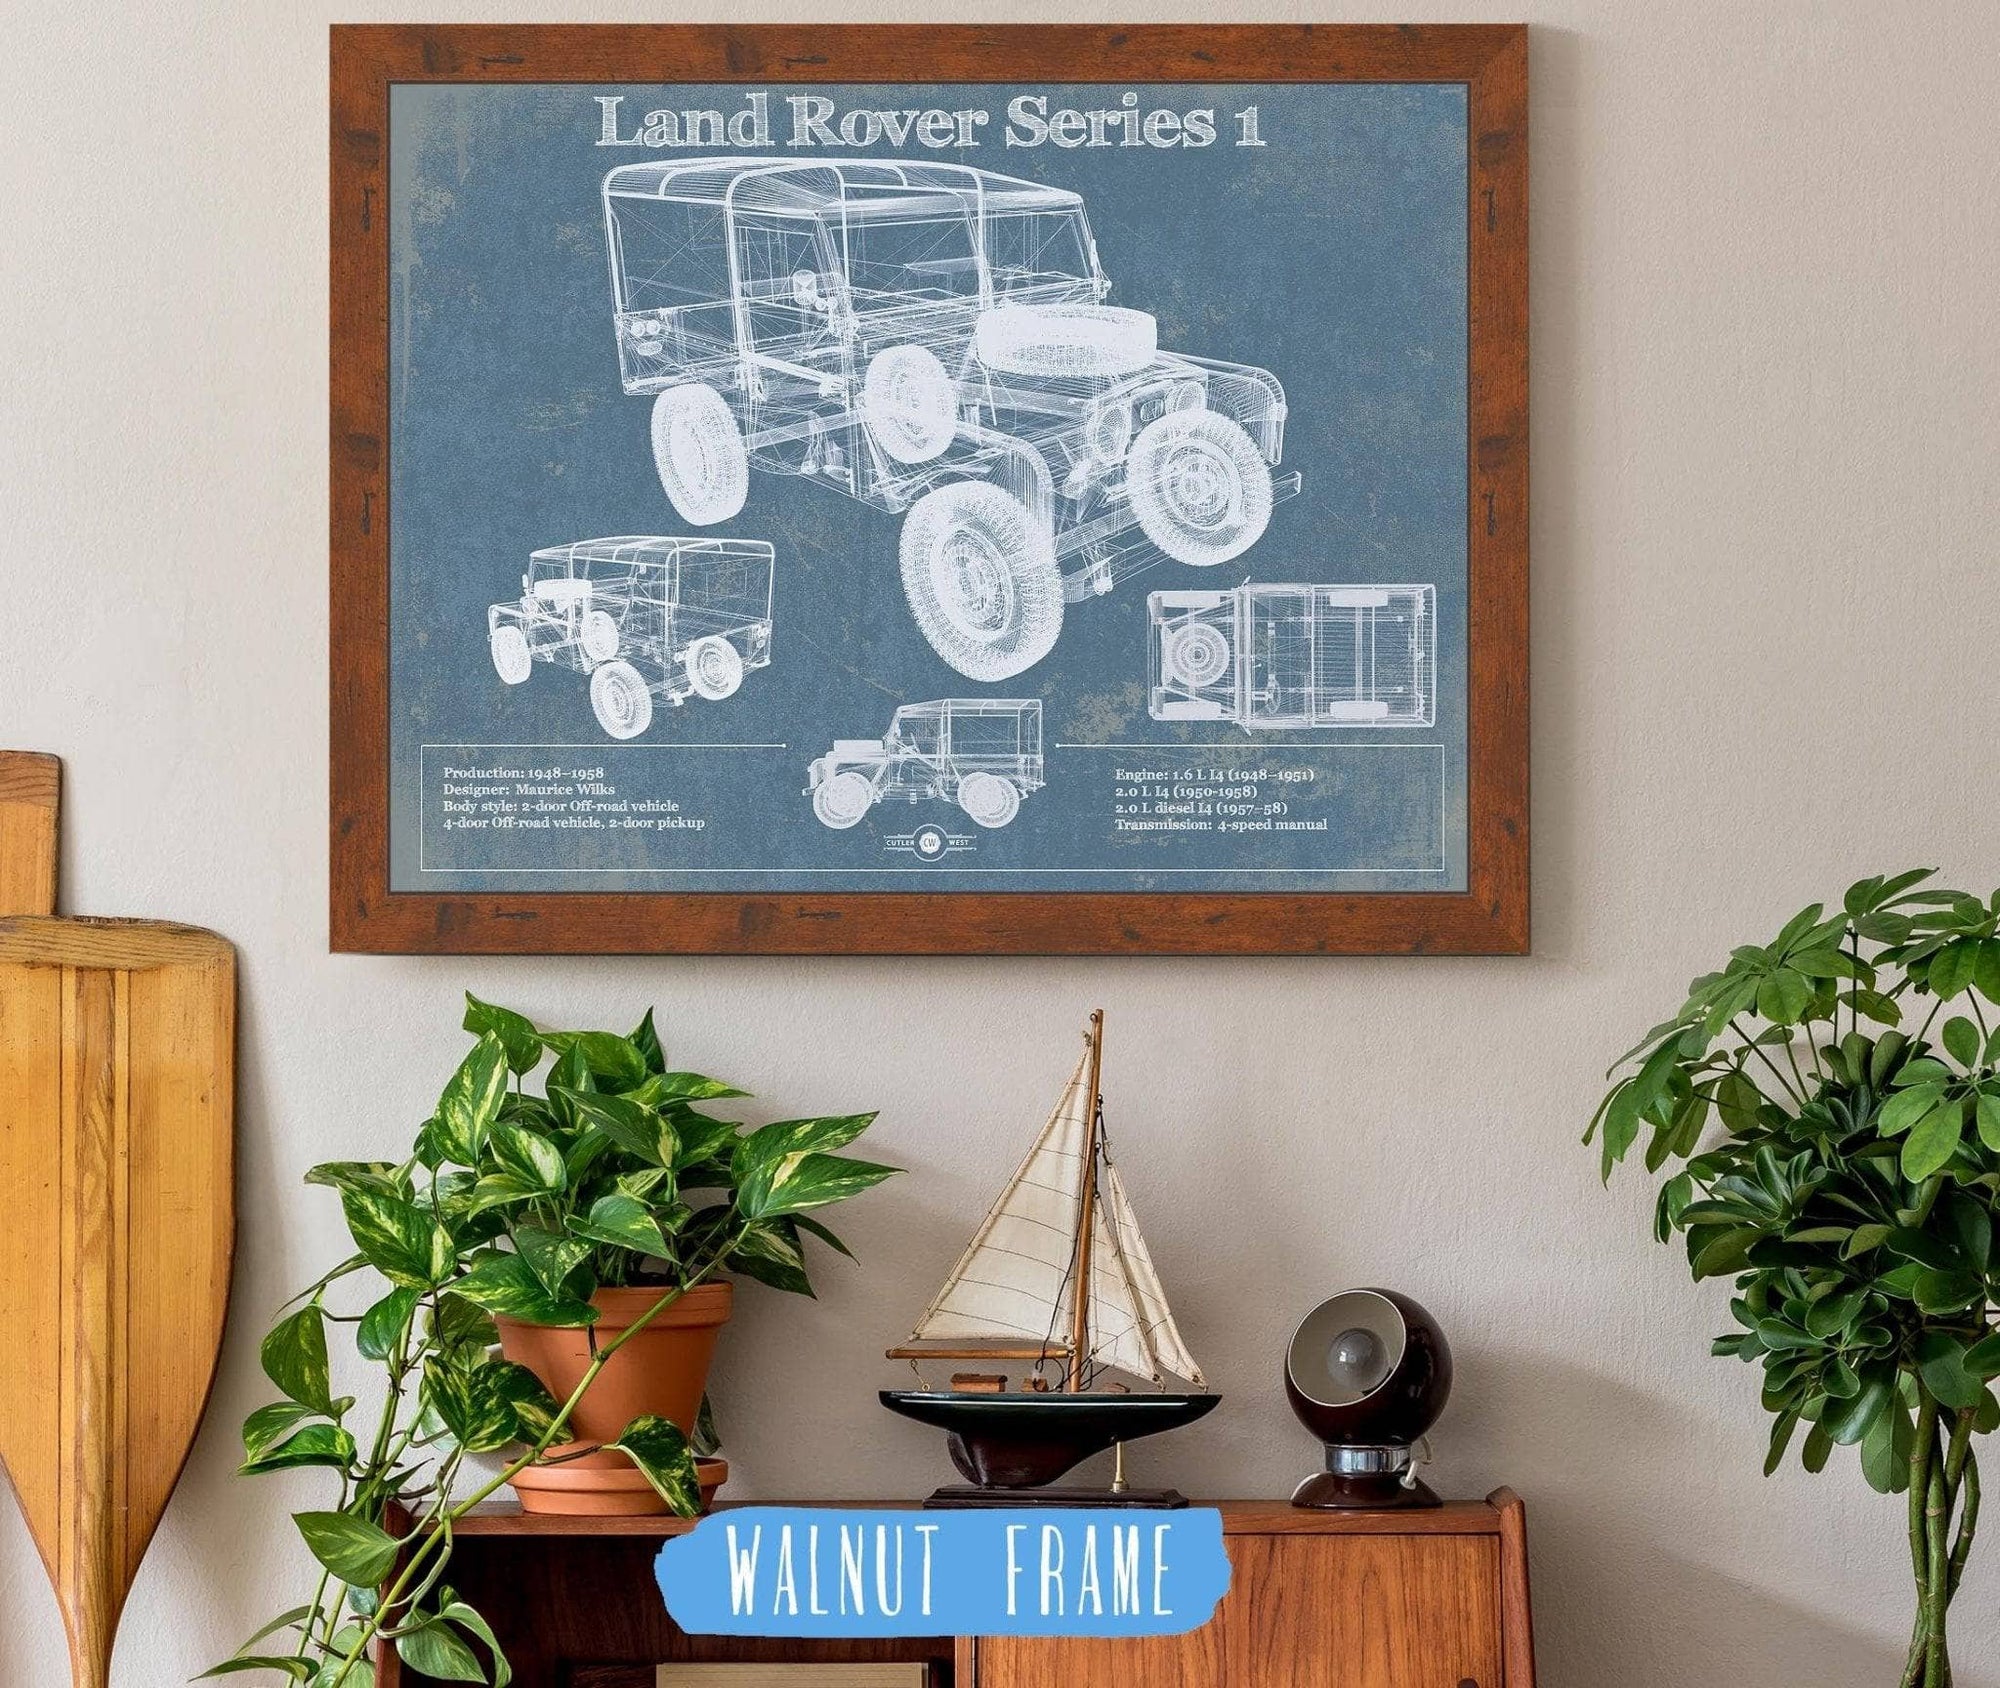 Cutler West Land Rover Collection 14" x 11" / Walnut Frame Land Rover Series 1 Blueprint Vintage Auto Patent Print 814256170_65569